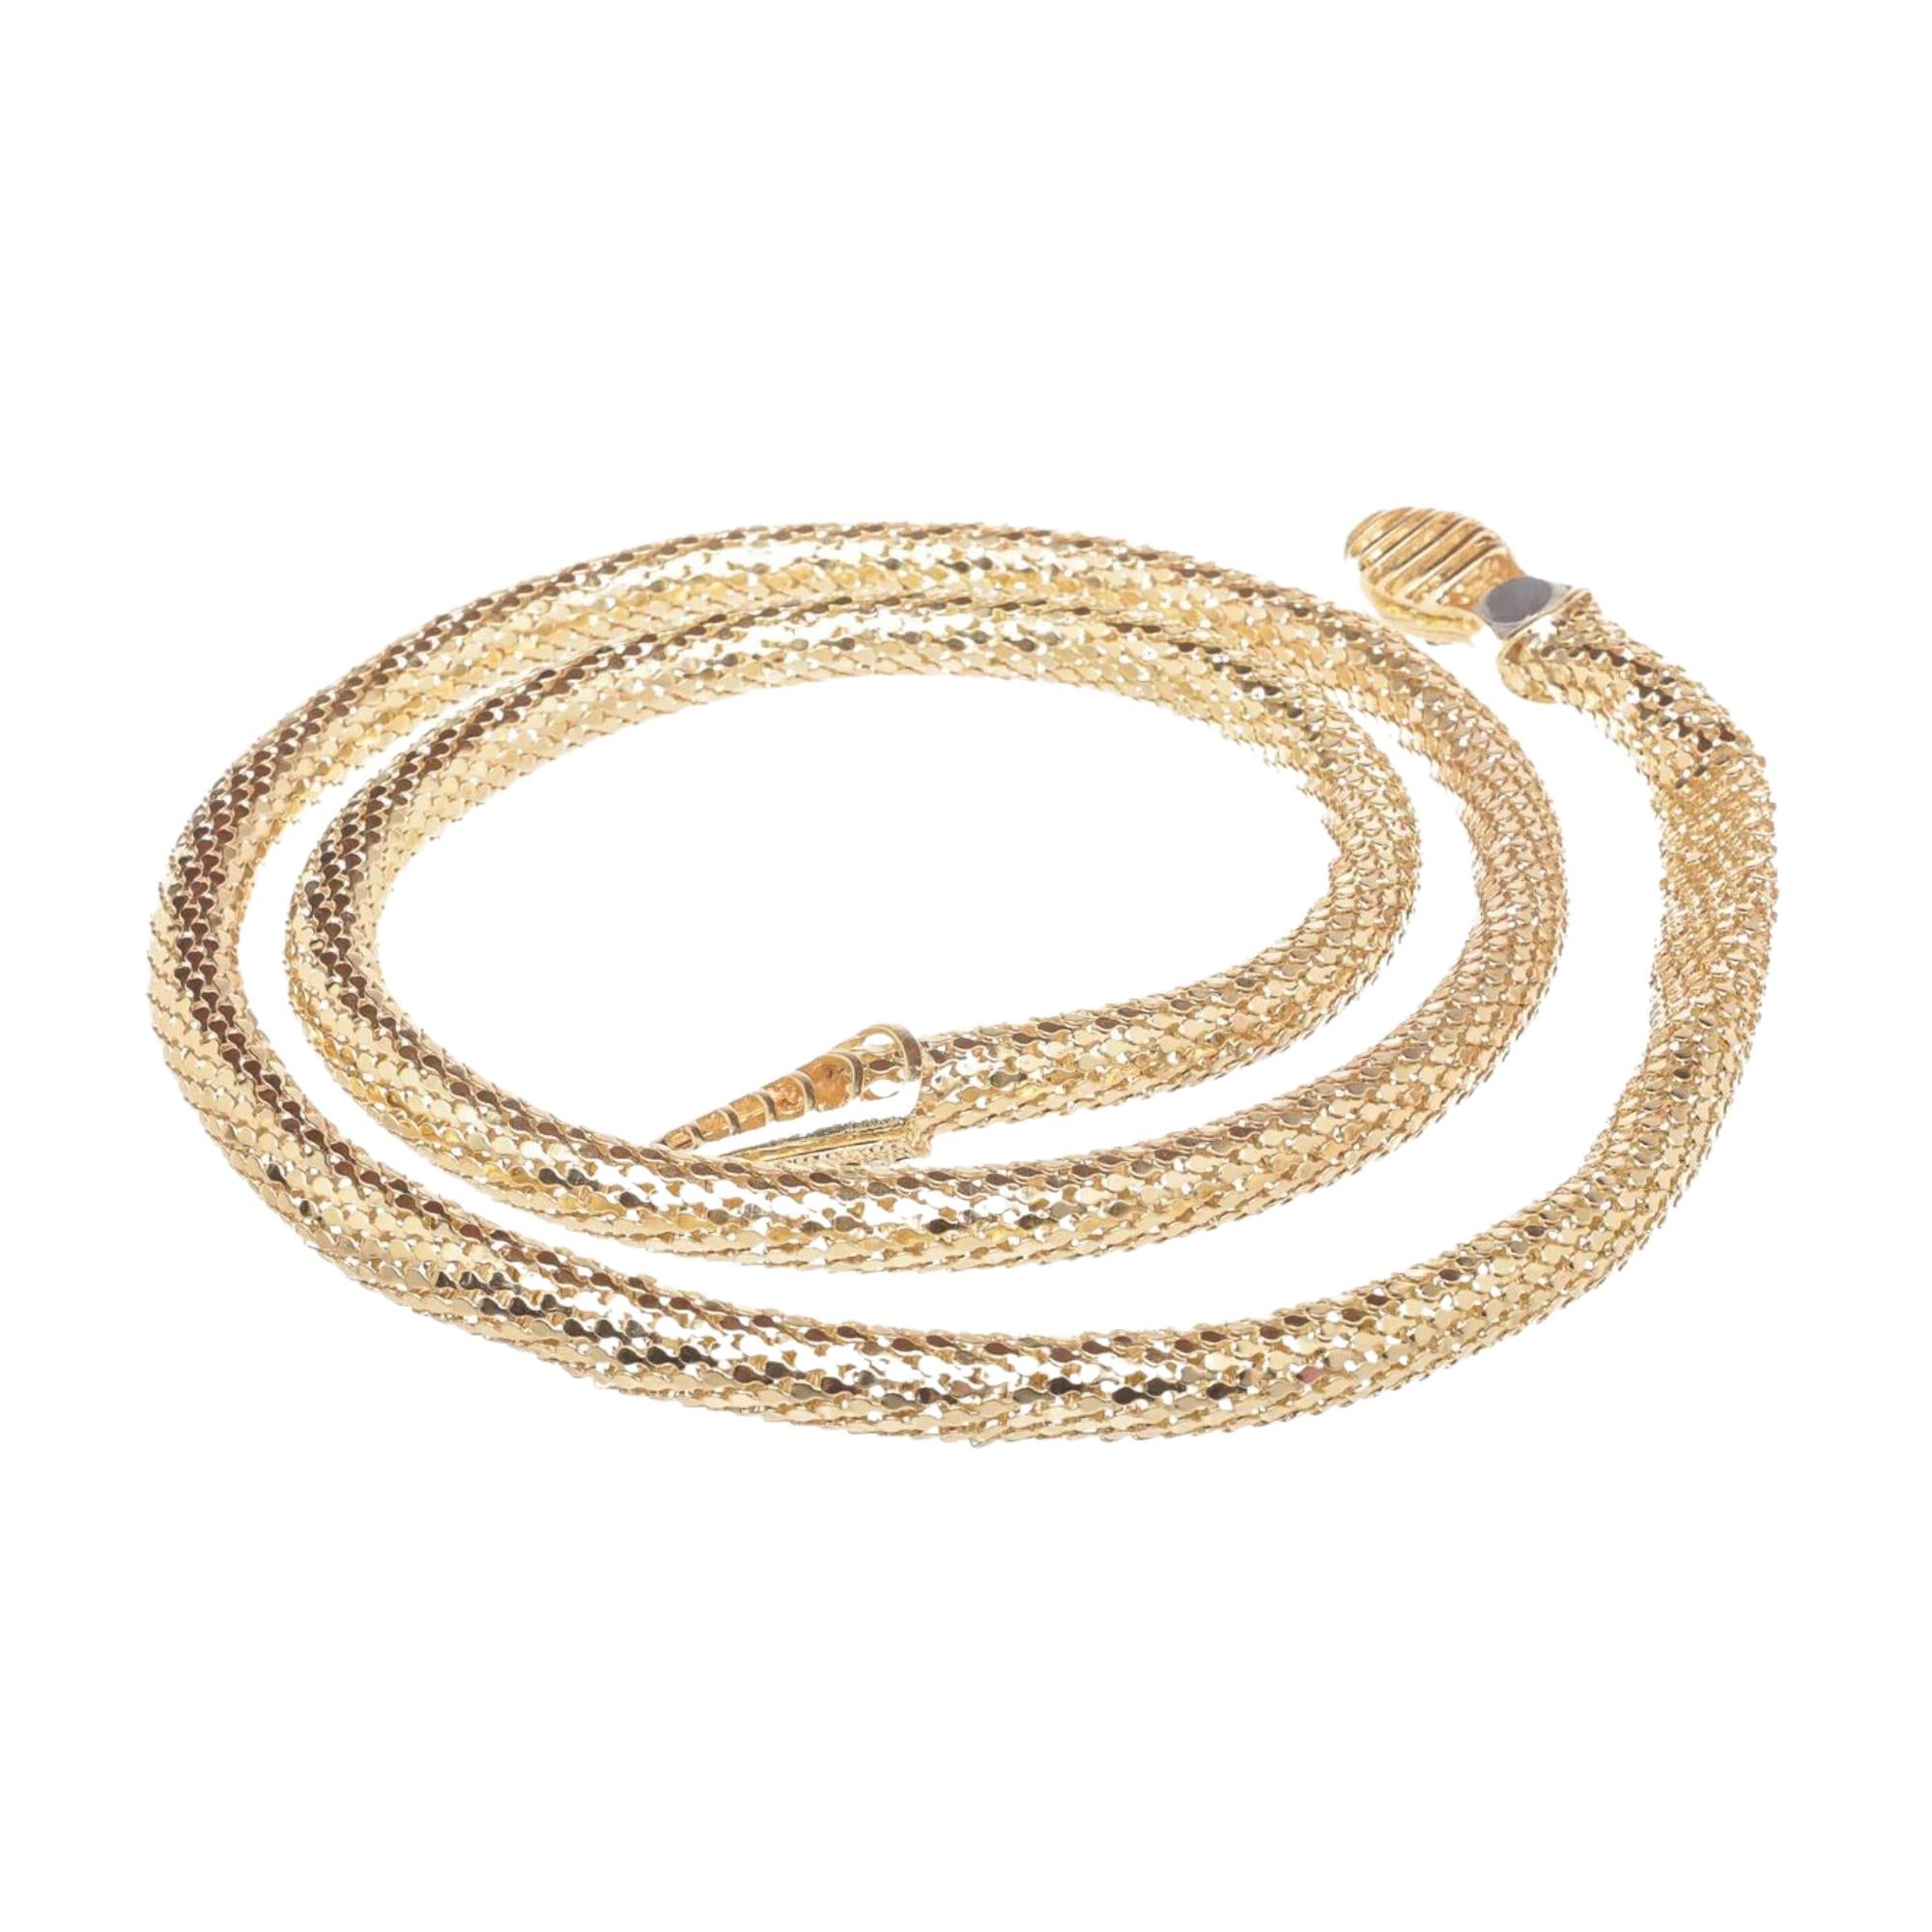 Edgy snake-inspired choker encrusted with crystals. Gold tone metal. Glass. Slip-on style
 
Color: Gold tone
Material: 22k gold plated brass
Marks: Brand mark
Slip-on style
Year: Circa 2020
Condition: Very good. Item is pristine.

Made in Italy